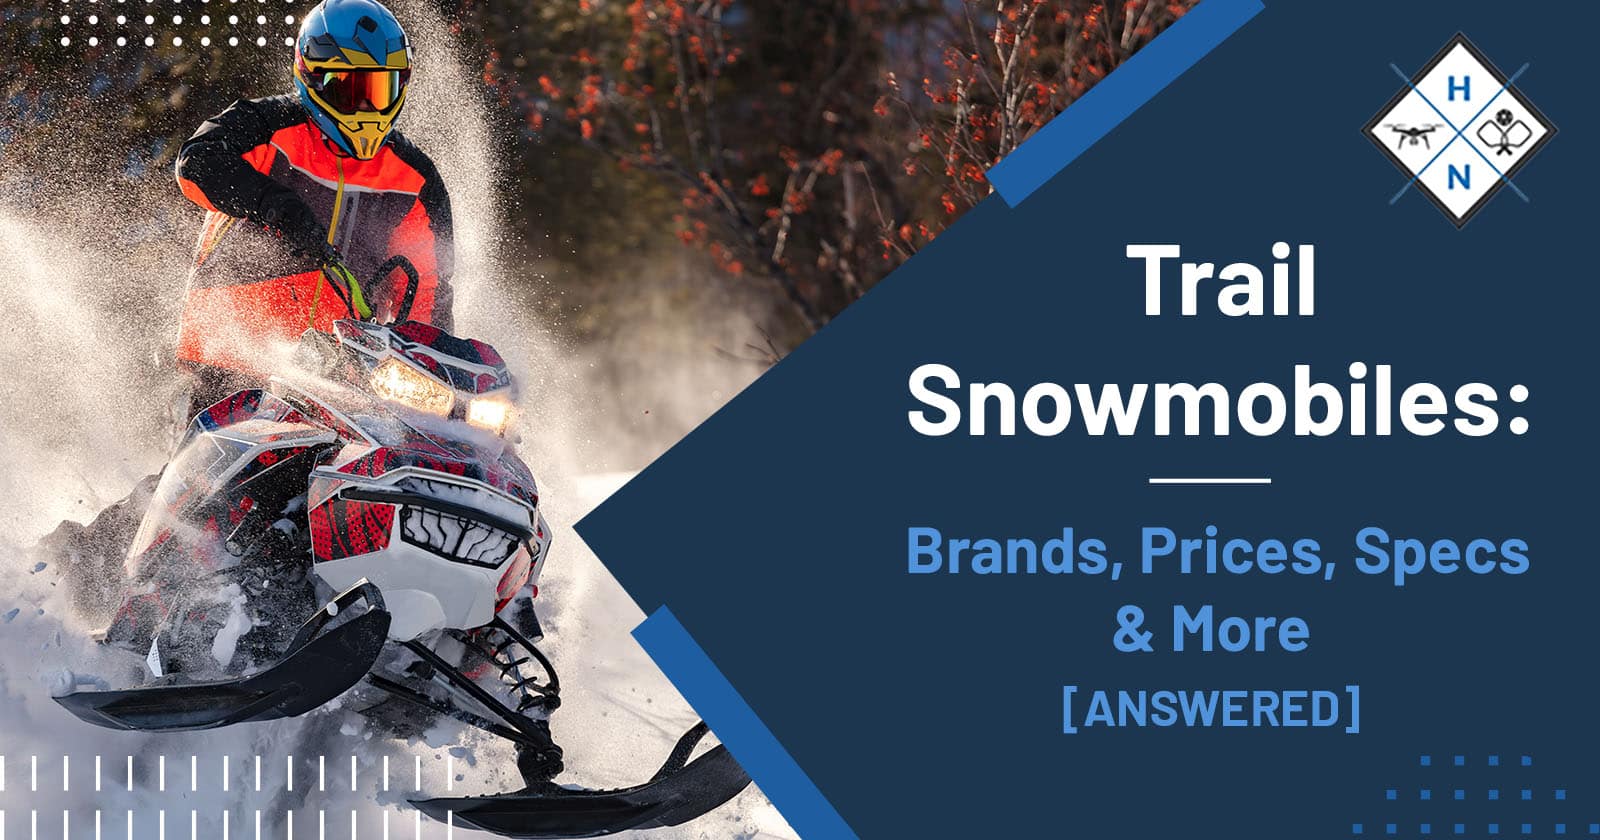 Trail Snowmobiles: Brands, Prices, Specs &#038; More